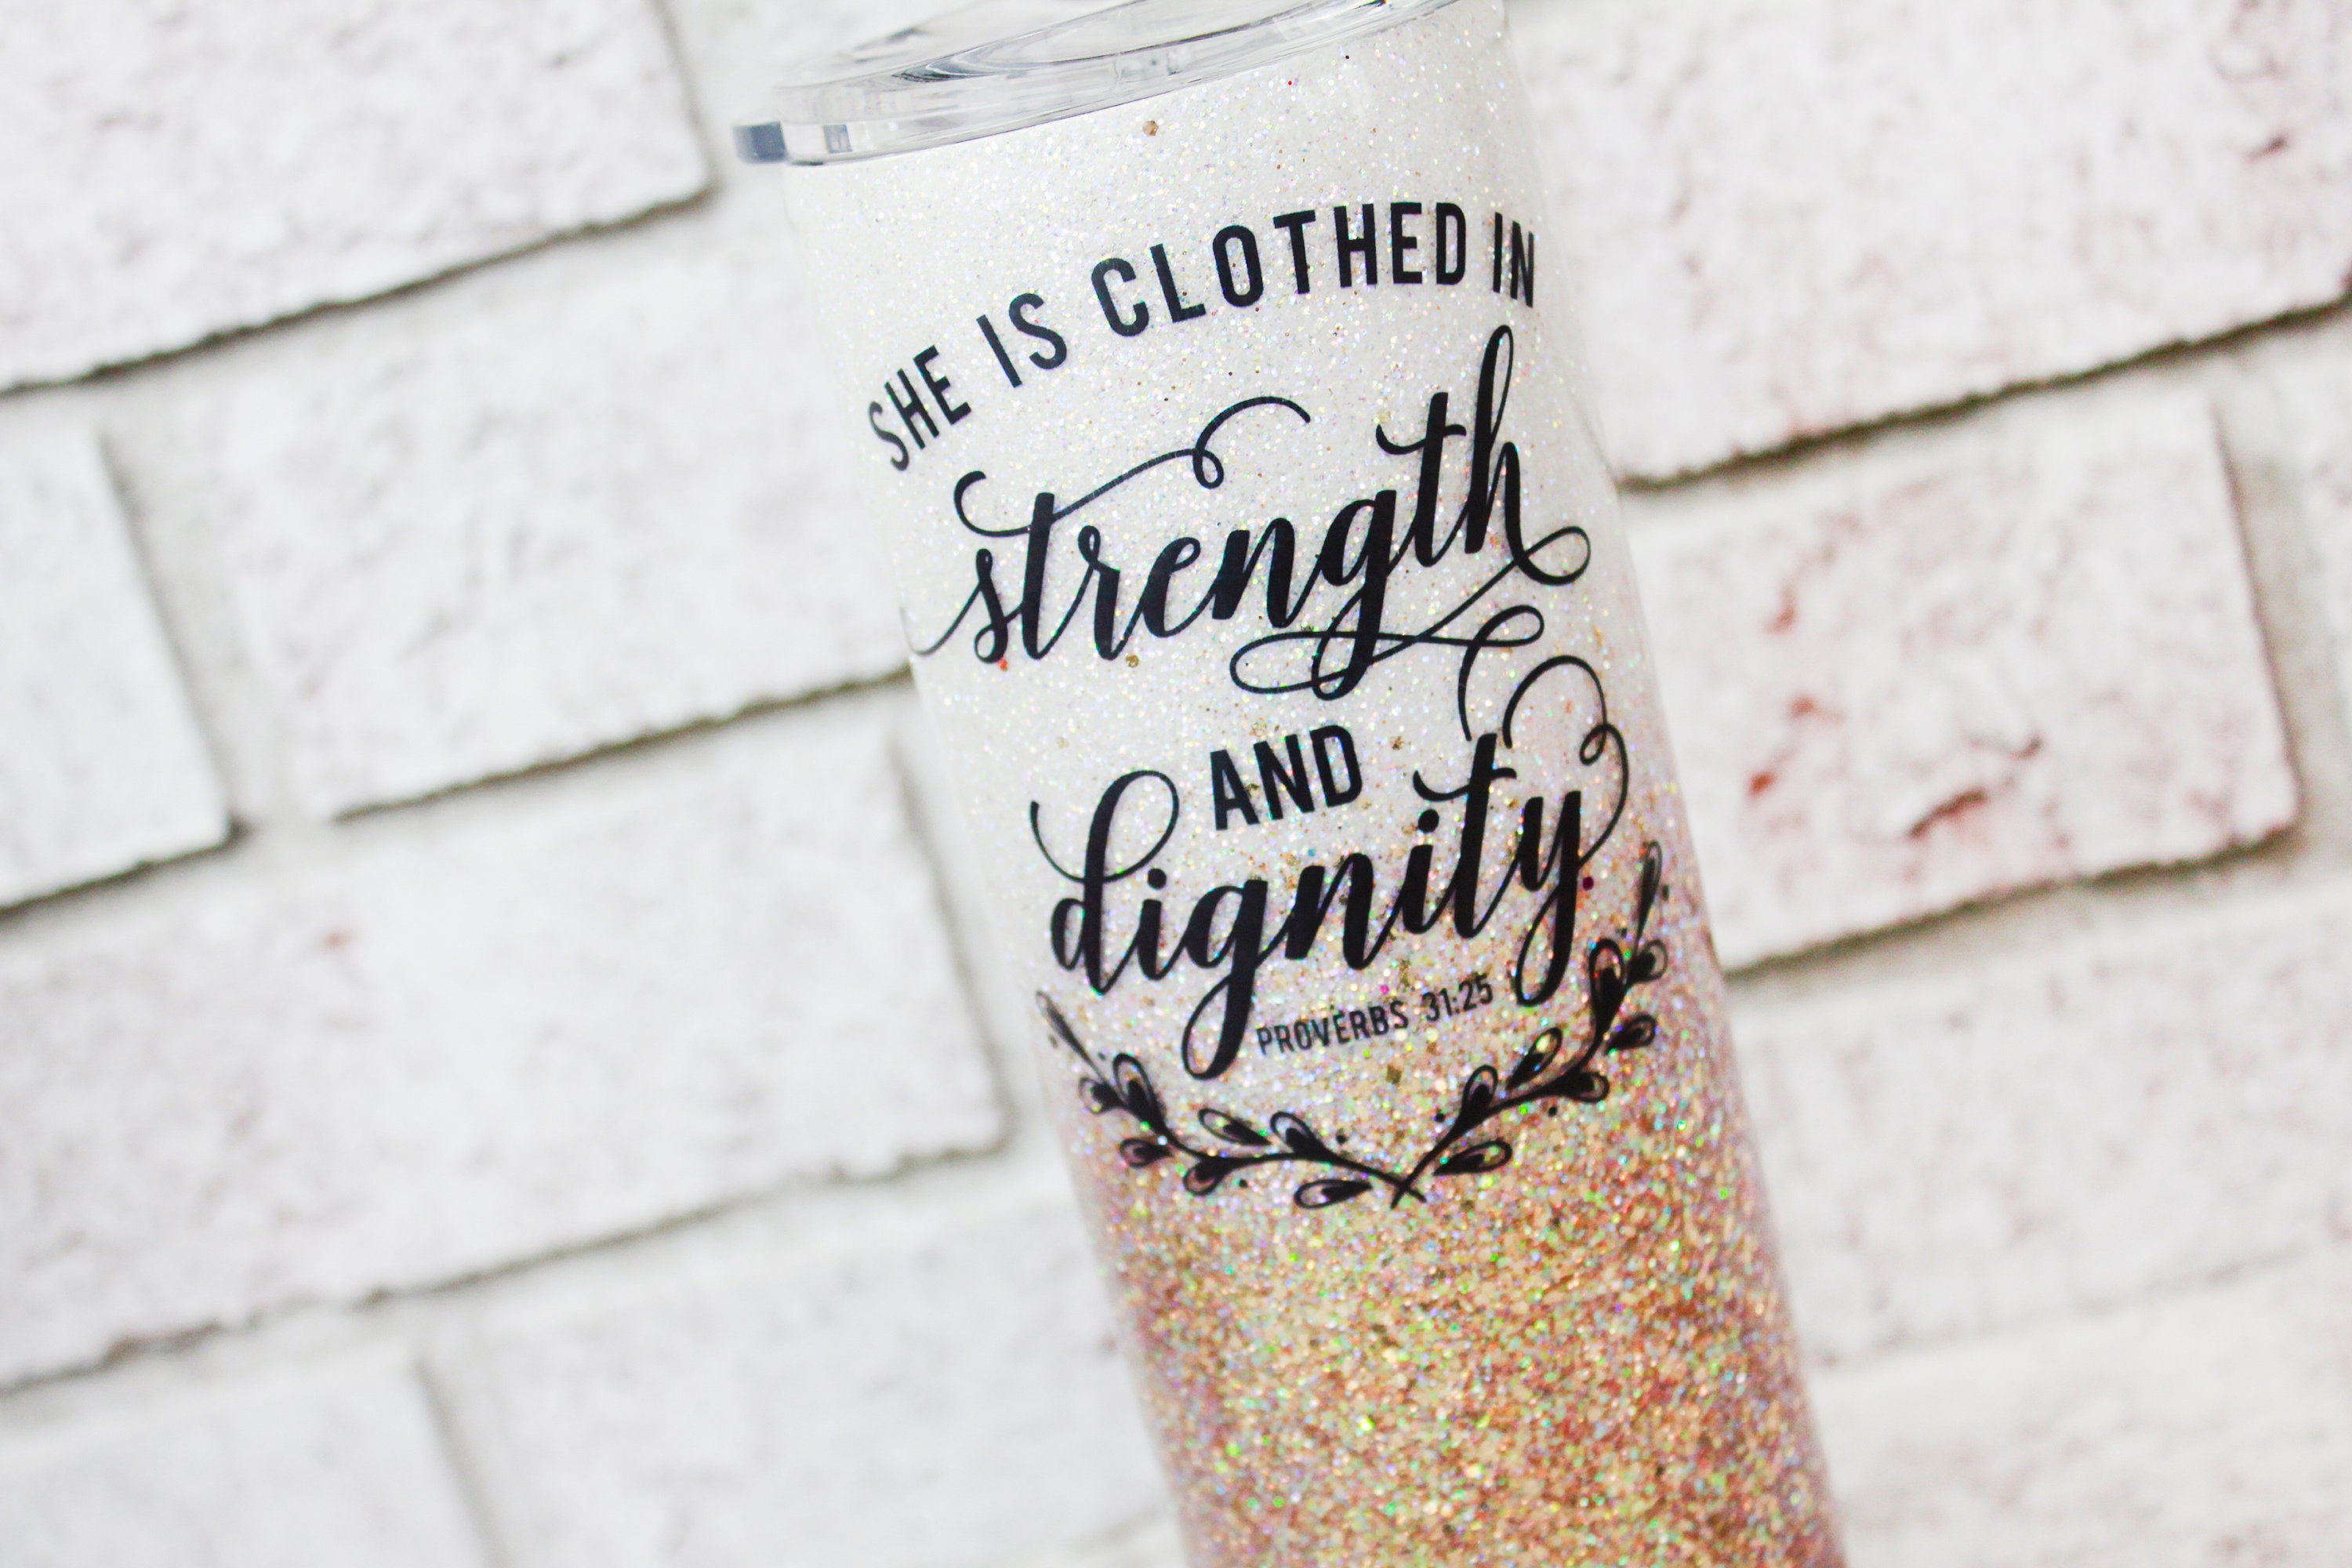 Dignity and Strength glitter tumbler, 30 ounce skinny tumbler